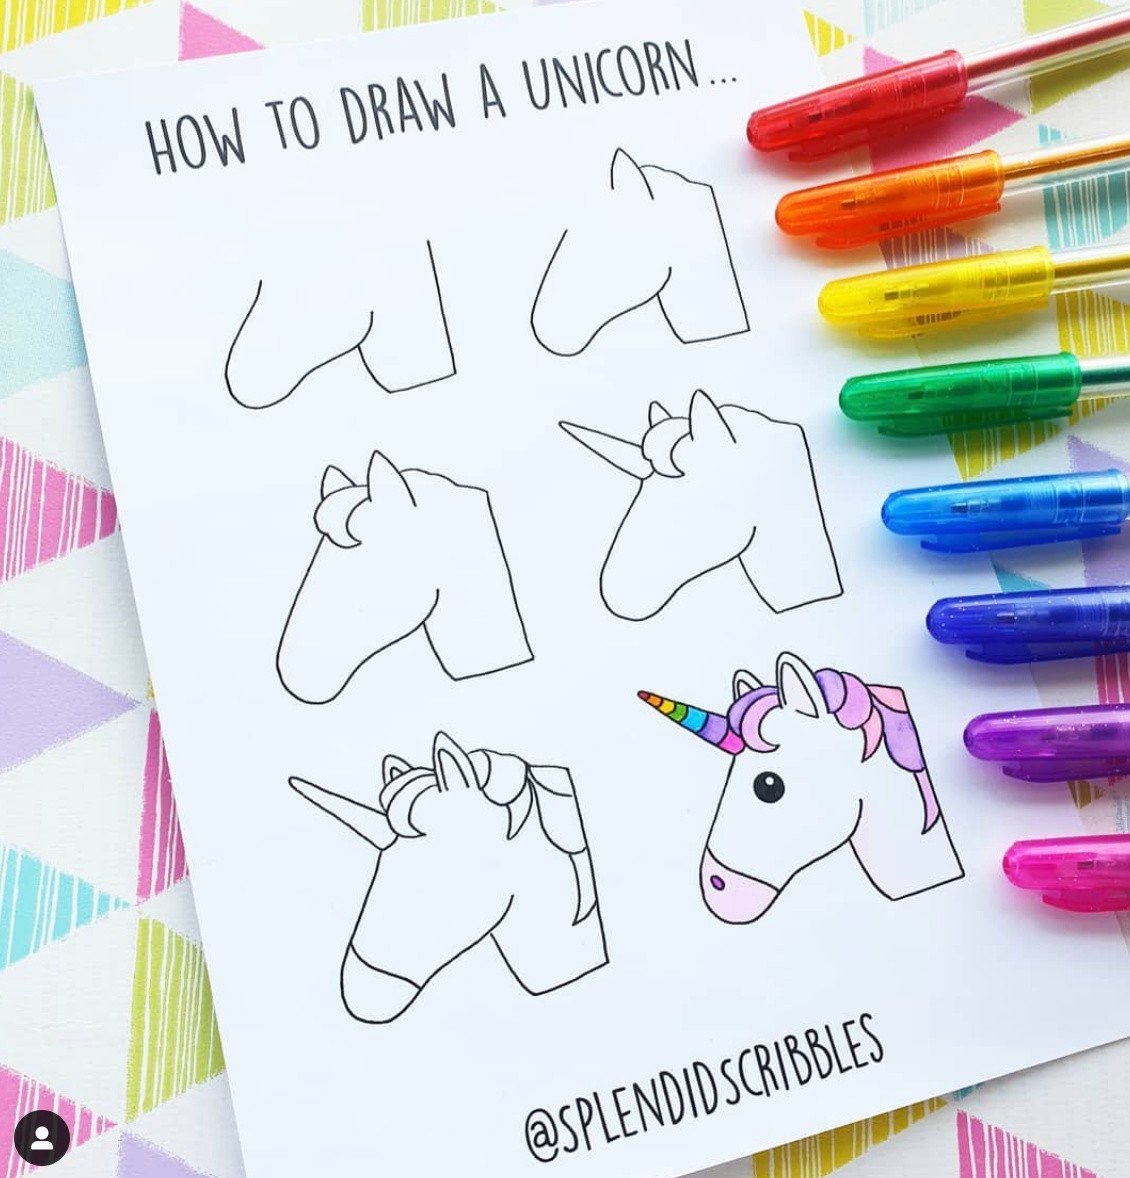 How To Draw a Unicorn: 10 Easy Drawing Projects-saigonsouth.com.vn